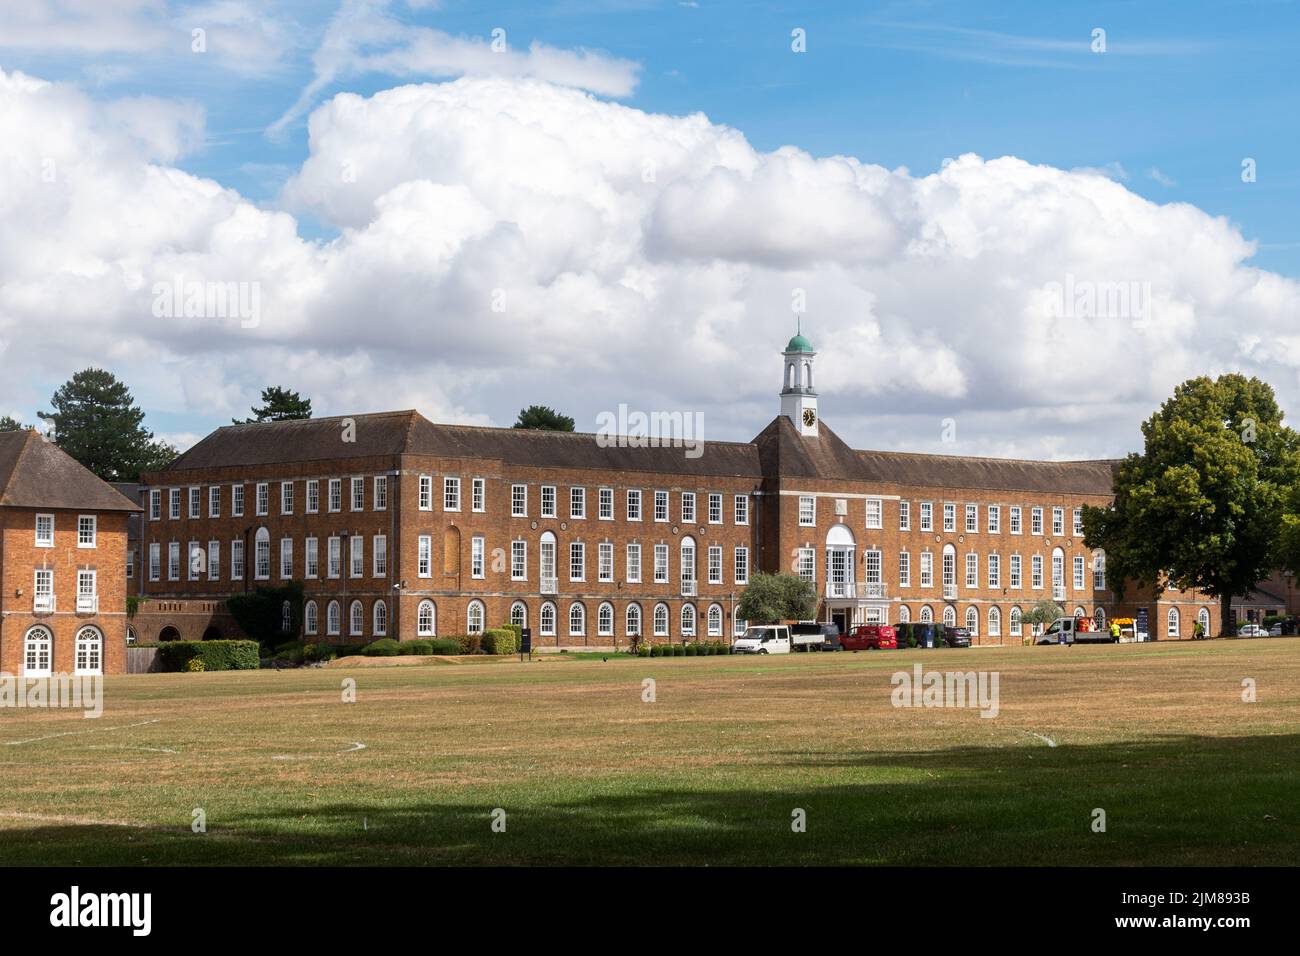 St Swithun's School, an independent day and boarding school in Winchester, Hampshire, England, UK. Stock Photo